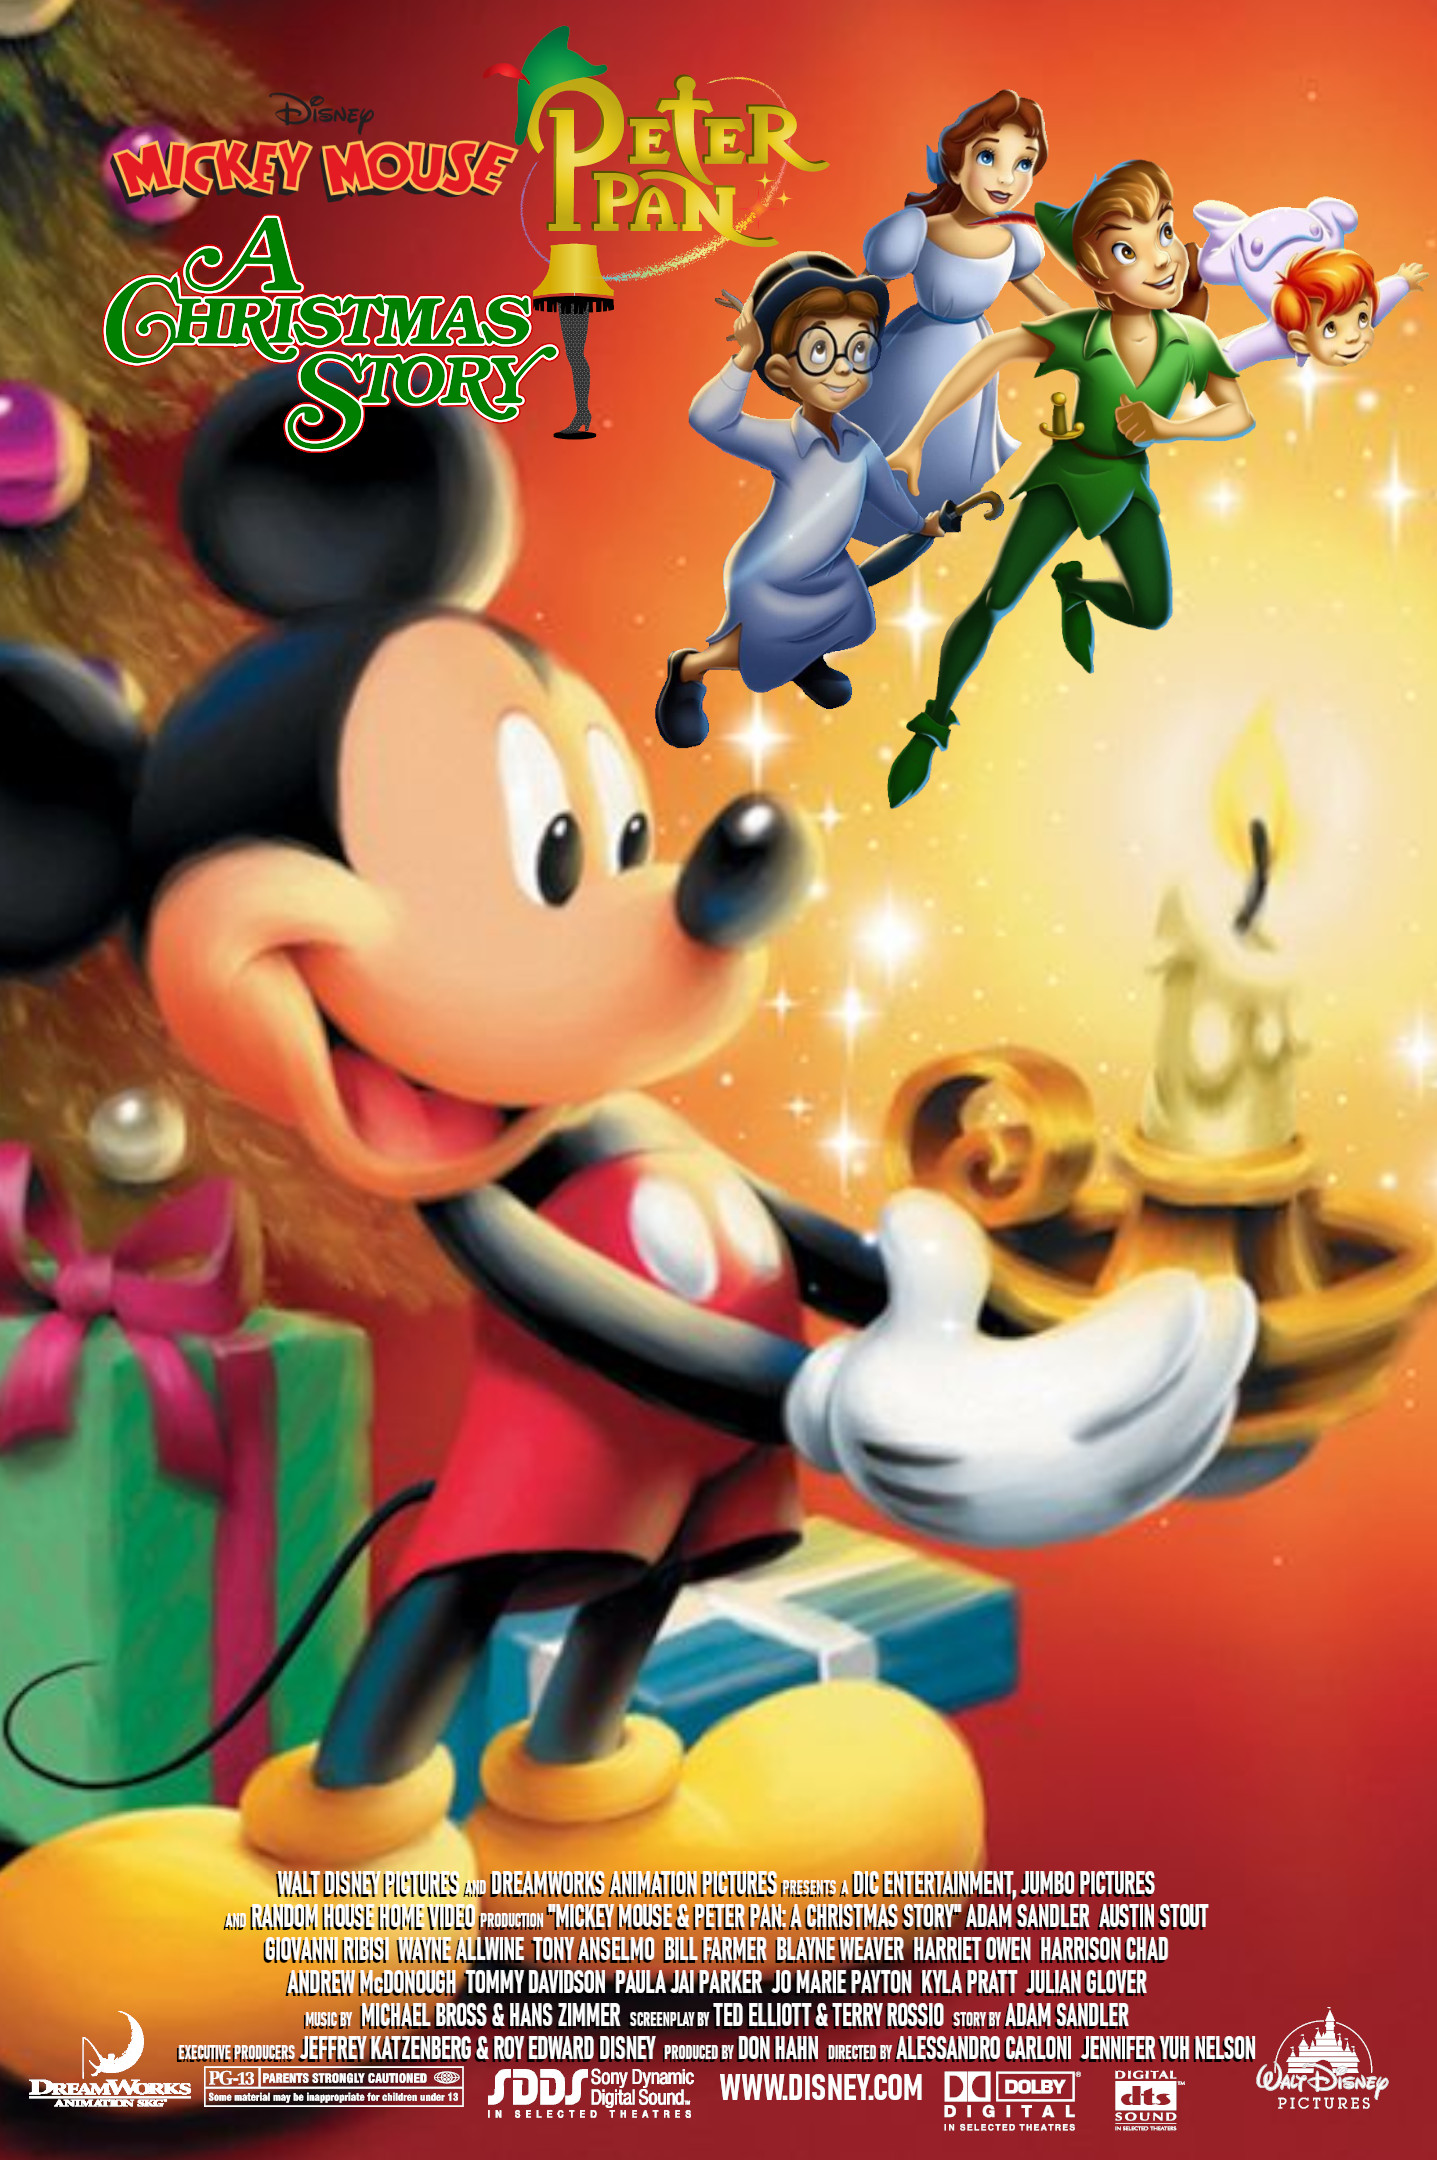 https://static.wikia.nocookie.net/walt-disney-movies-series/images/e/e6/Mickey_Mouse_and_Peter_Pan_in_A_Christmas_Story.jpg/revision/latest?cb=20201105151324